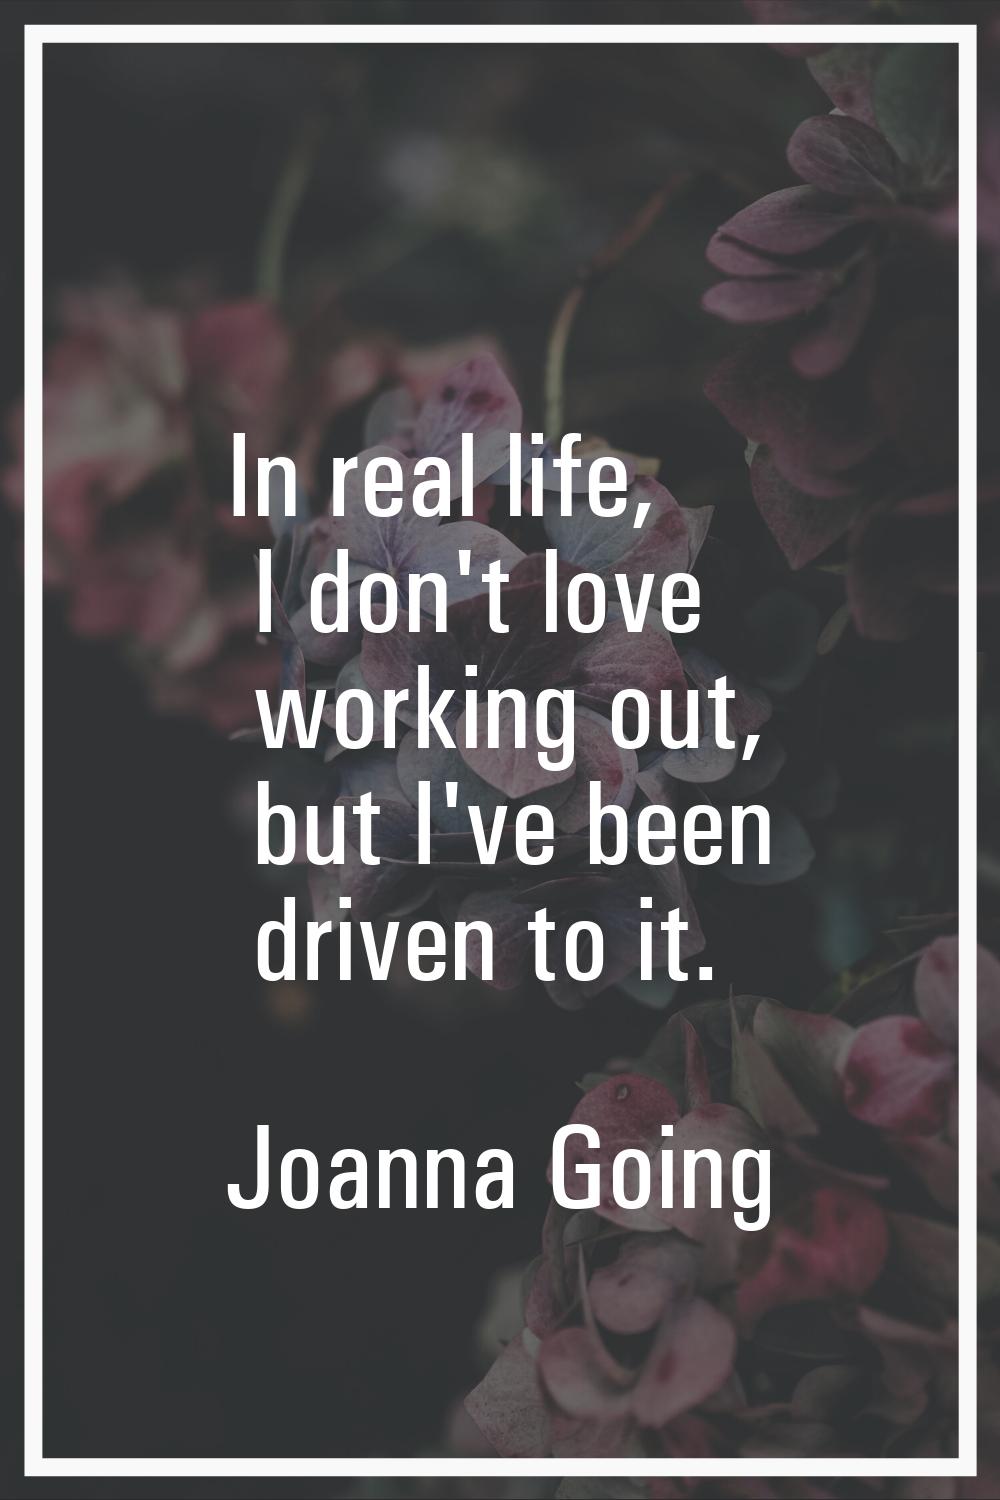 In real life, I don't love working out, but I've been driven to it.